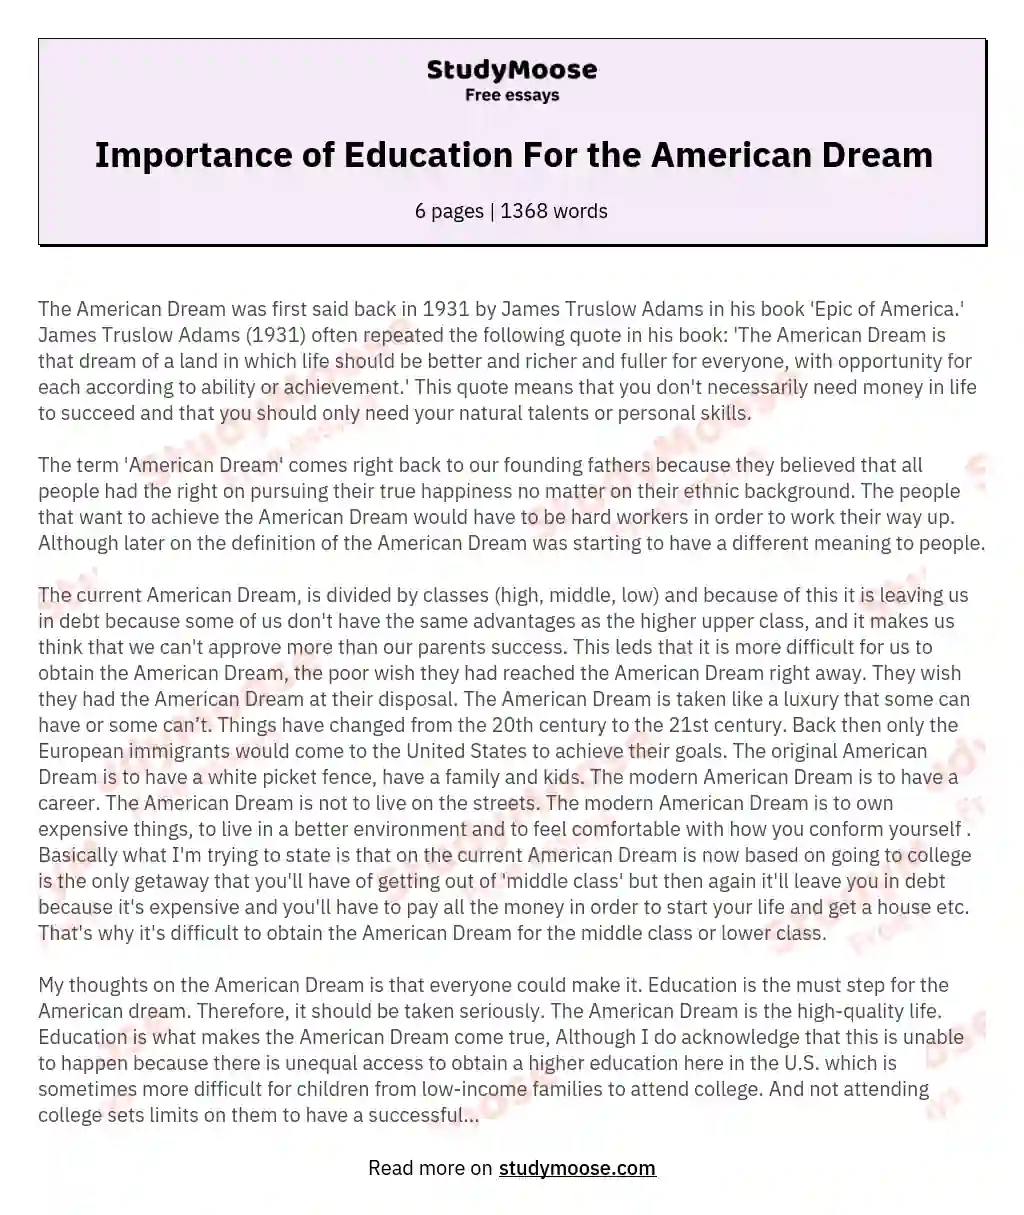 Importance of Education For the American Dream essay